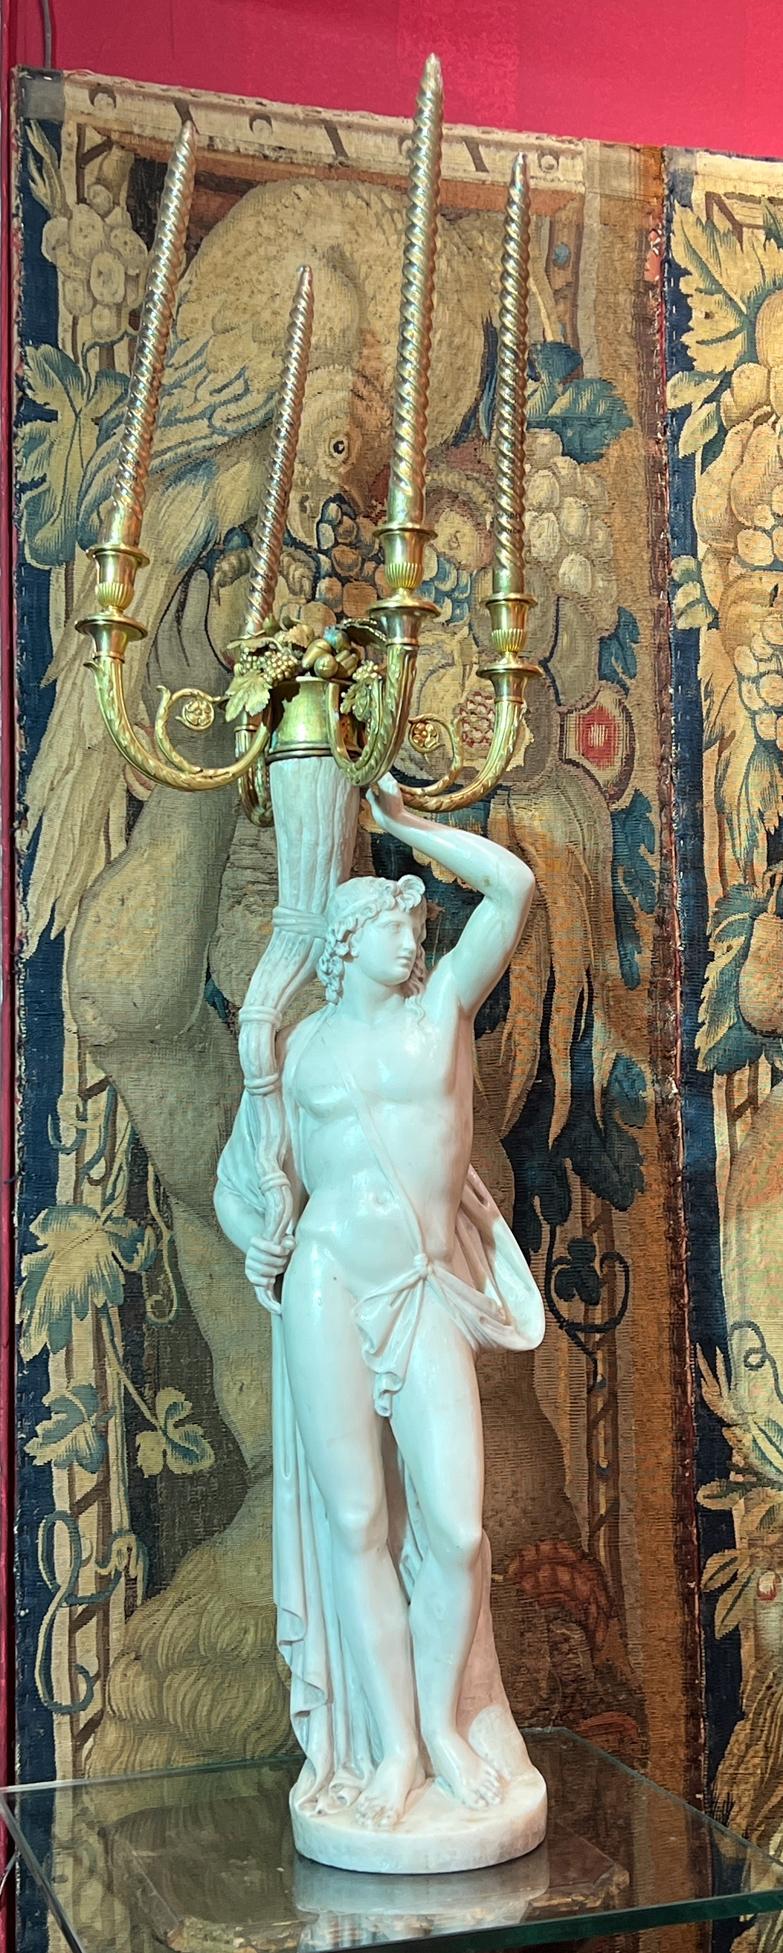 Our monumental pair of 18th century candelabra of French origin depict Roman neoclassical male and female holding cornucopia, finely carved from white marble, with four light ormolu bronze candleholders  of foliate design with fruits, nuts and grape